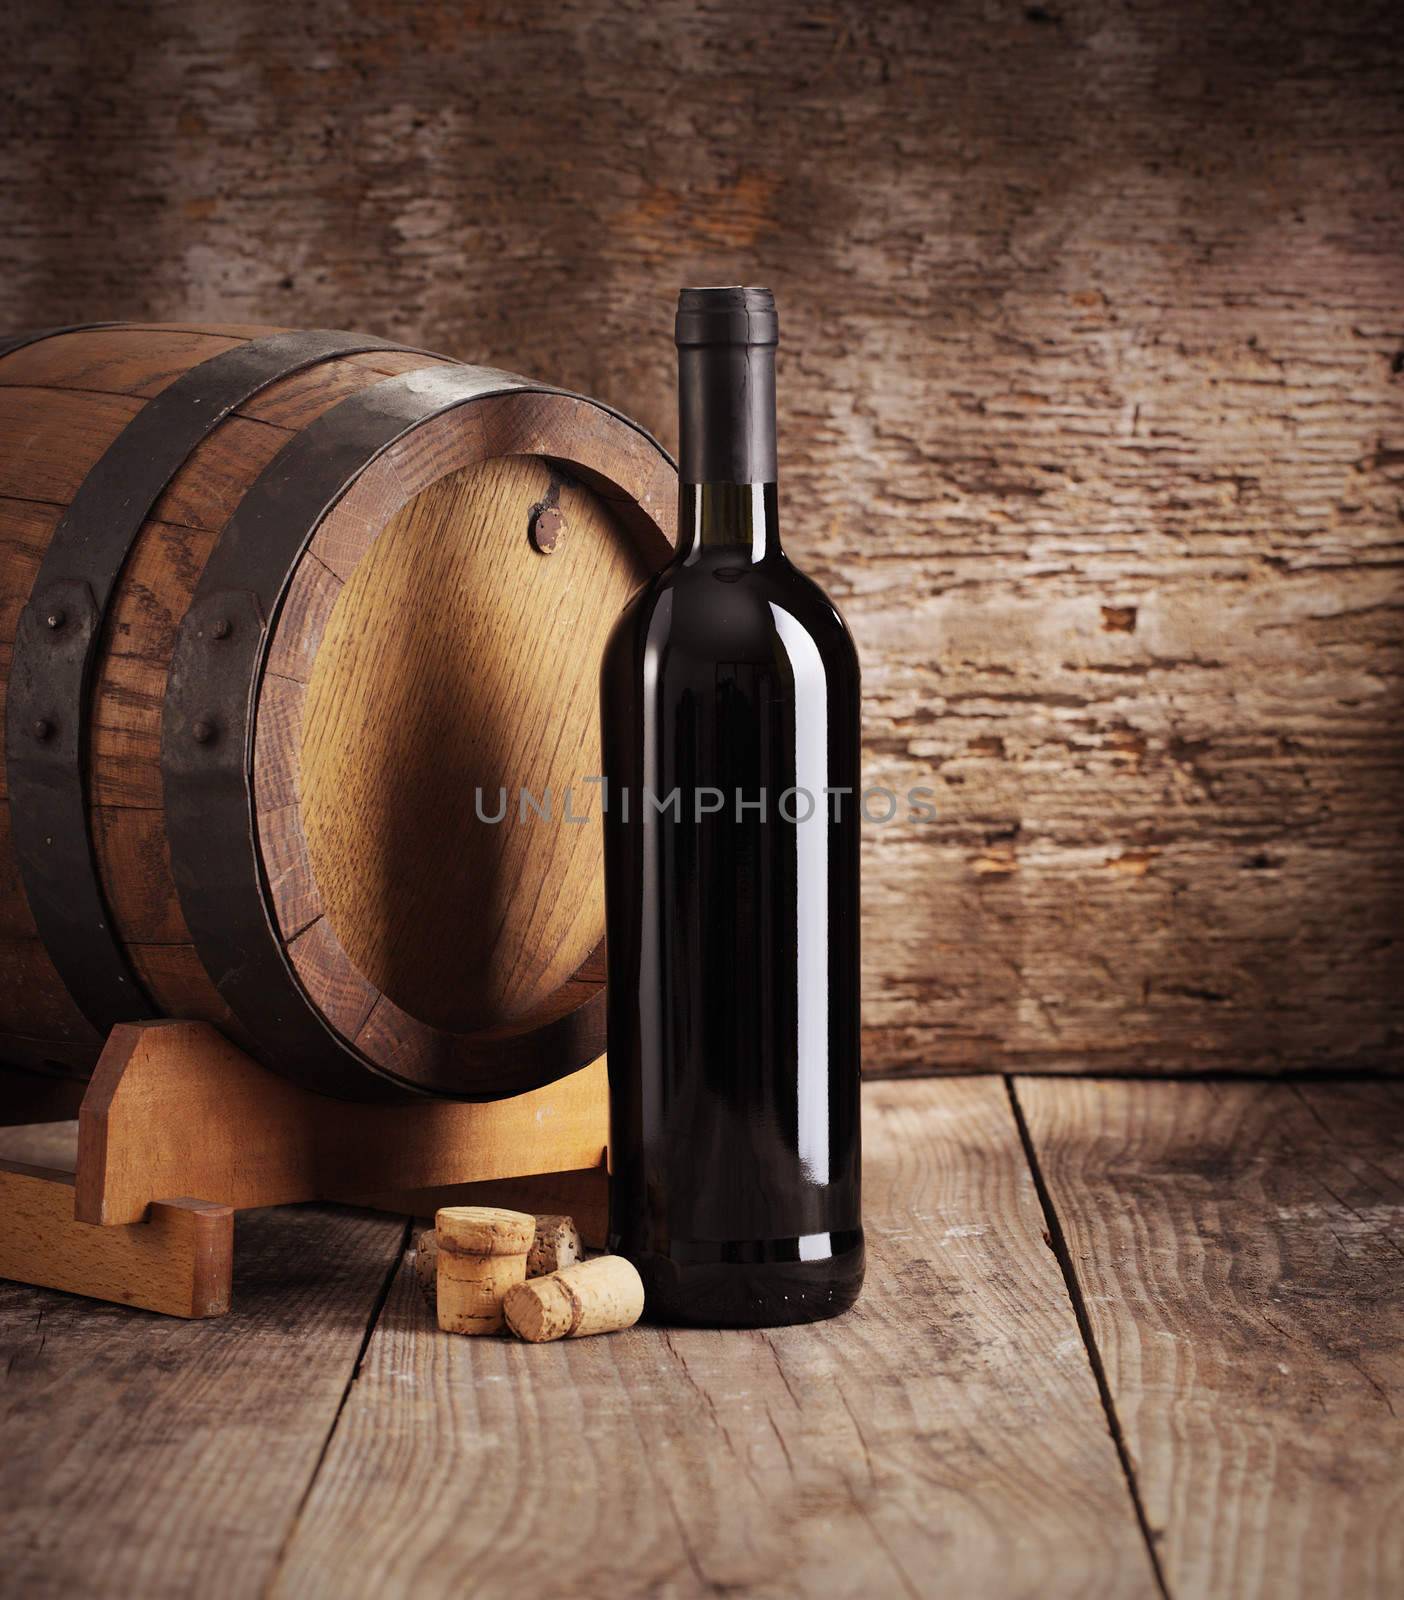 Wine bottle with barrel and corks by stokkete